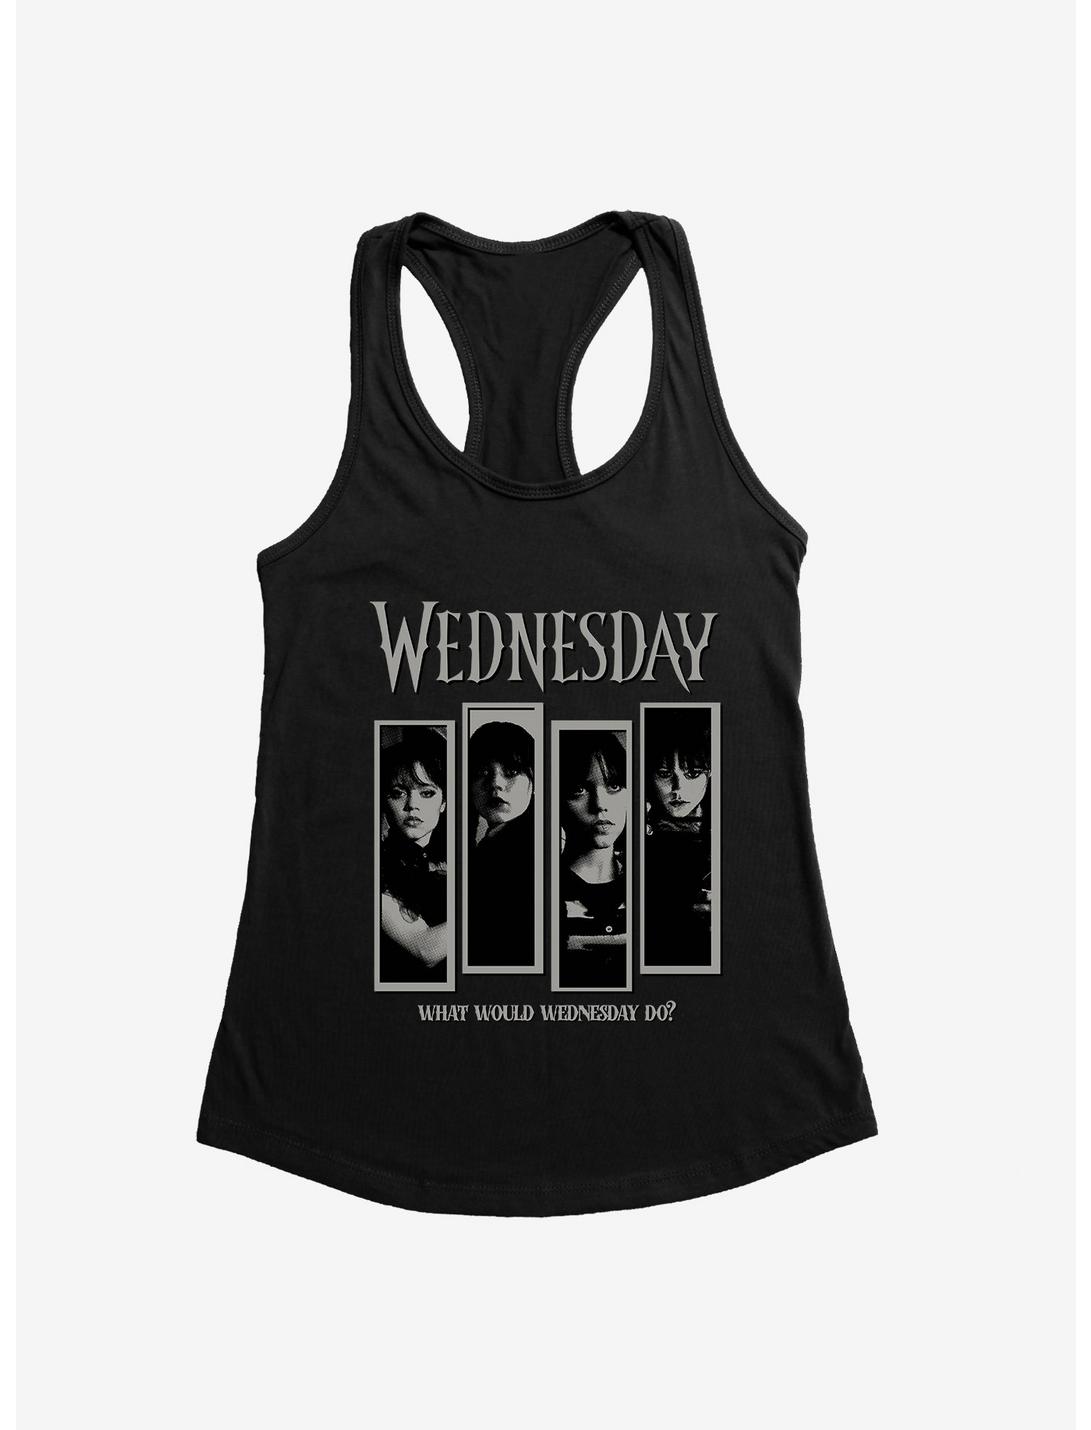 Wednesday What Would Wednesday Do? Panels Womens Tank Top, BLACK, hi-res